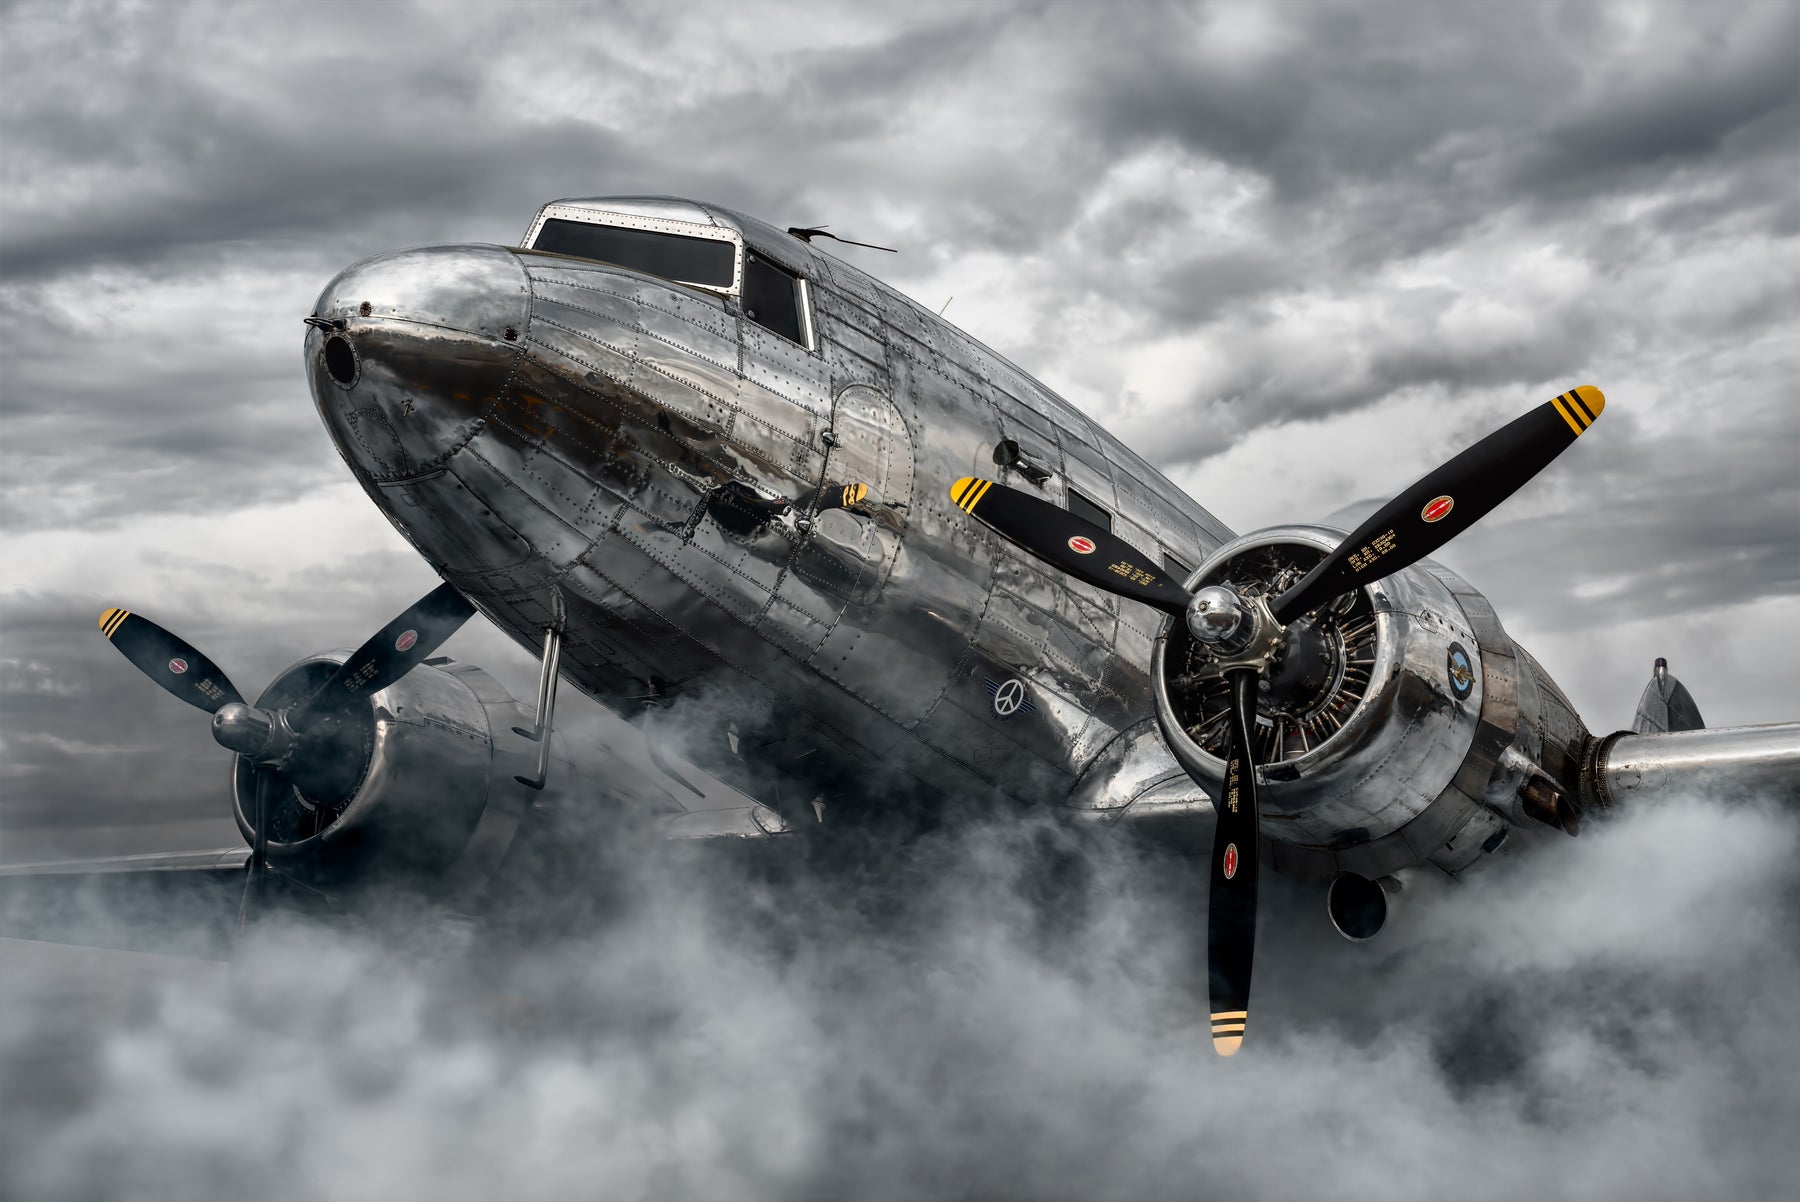 Photography from Peter Lik's Aviation photography collection of A vintage DC-3 capture+I58:M72d at dawn in the Alvord Desert. | LIK Fine Art